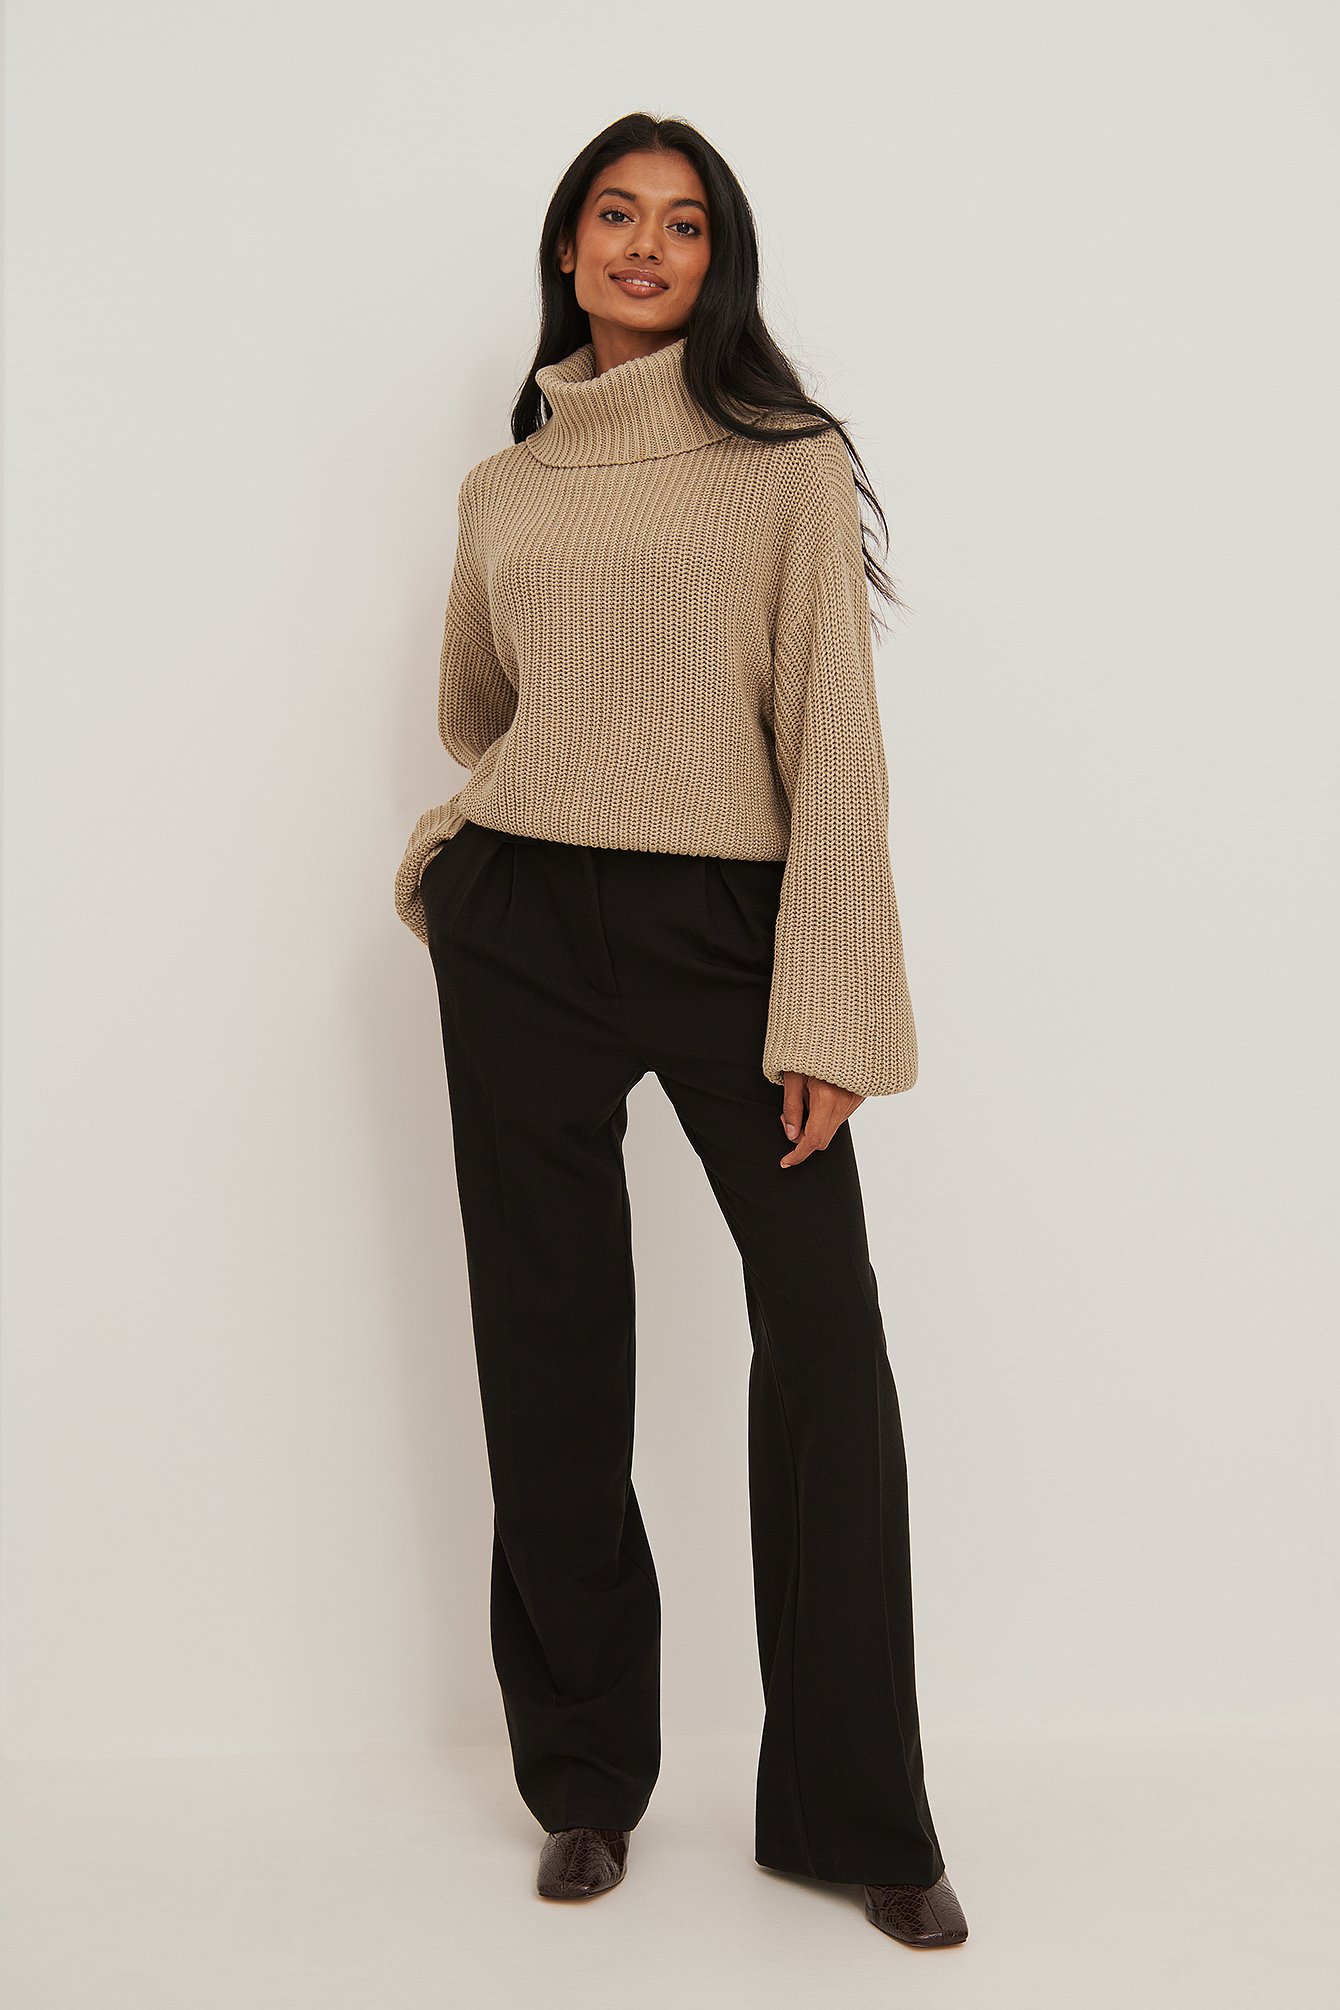 Beige Turtle Neck Short Knitted Sweater